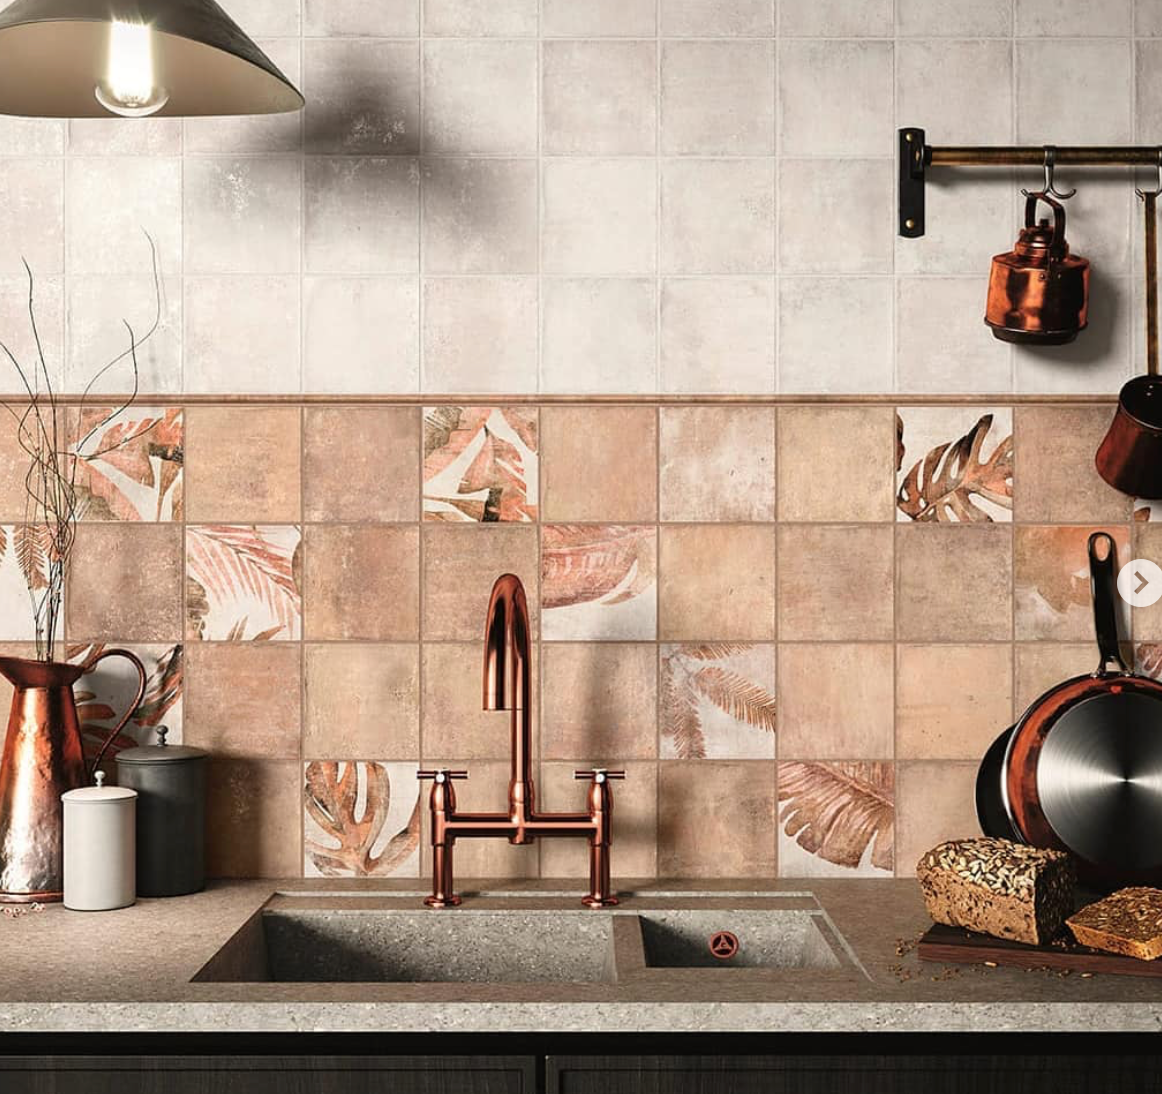 Our Top Five Tips for Choosing the Right Tiler